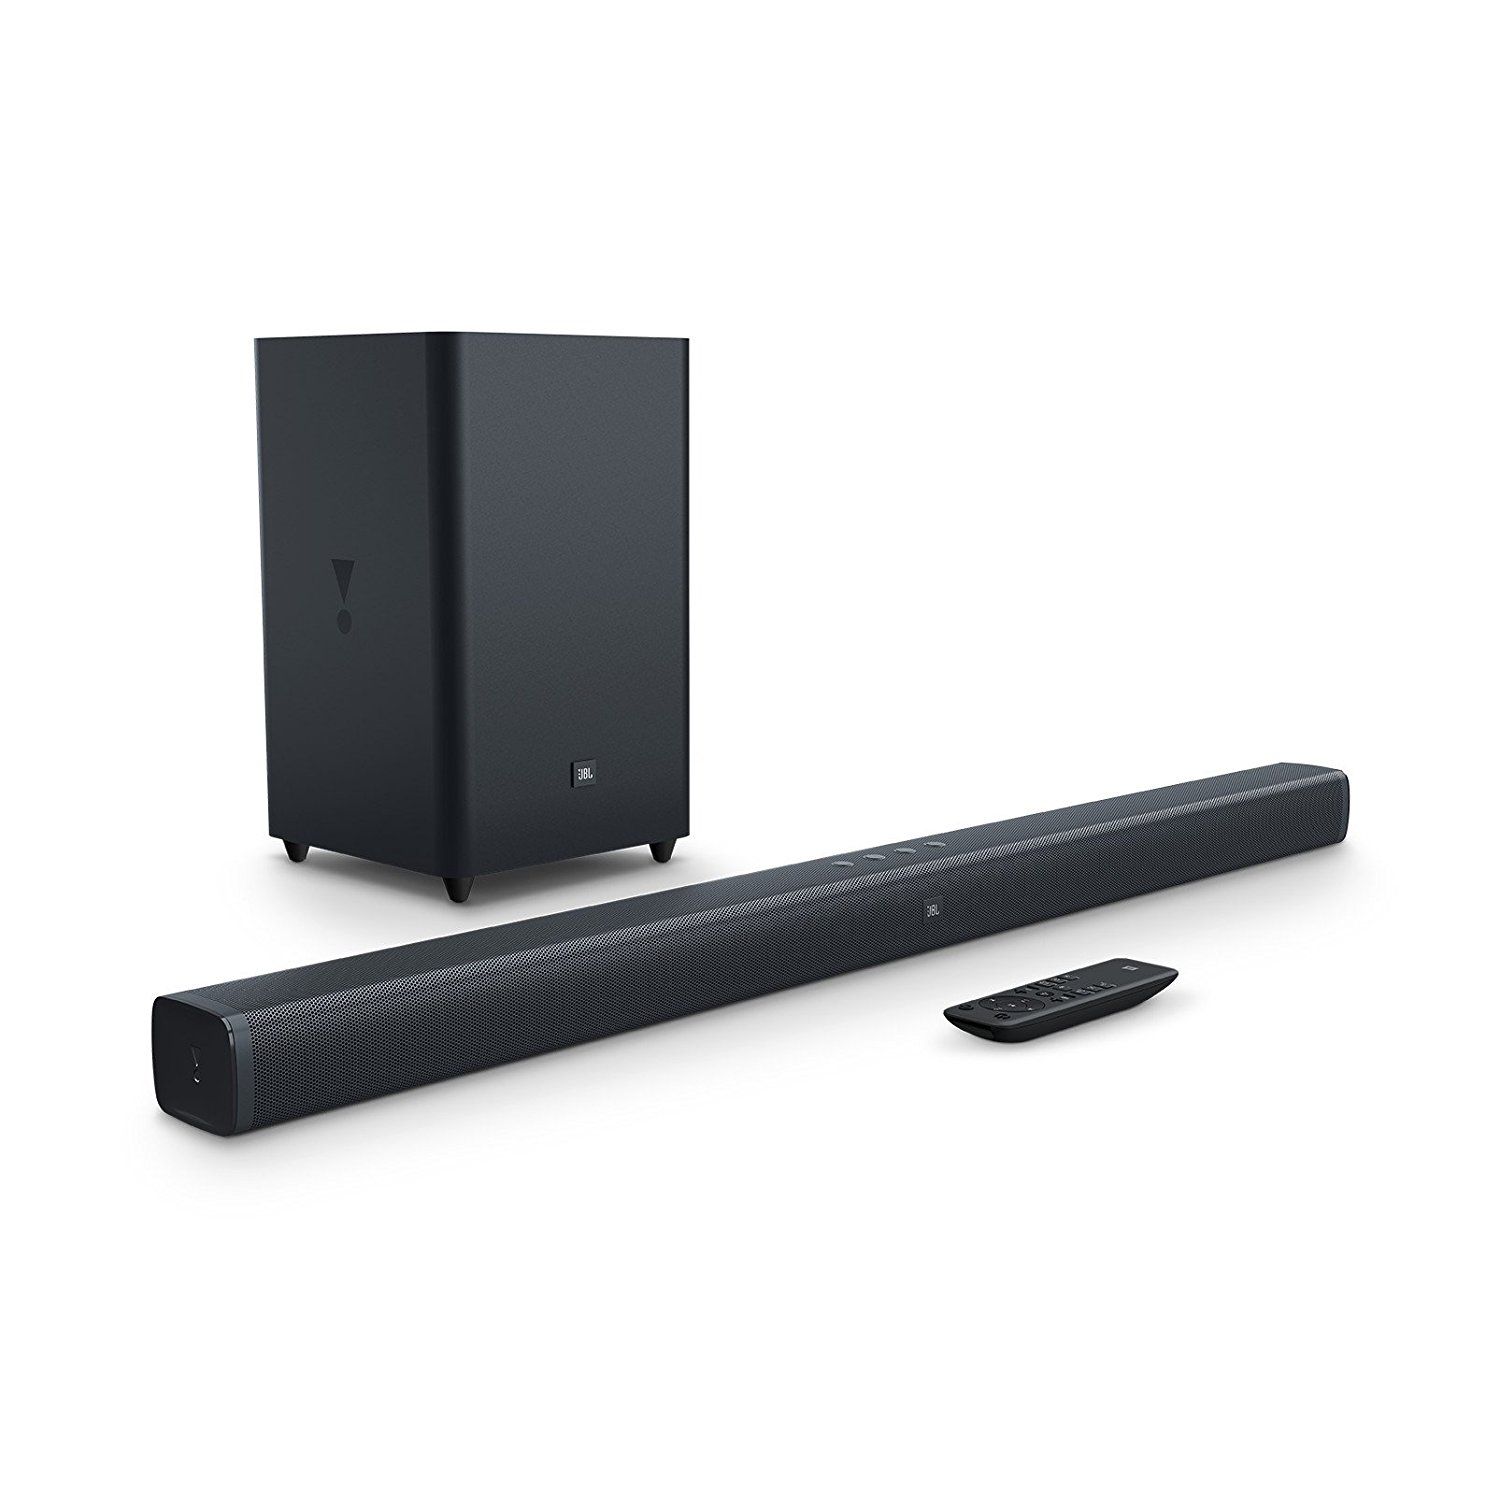 Buy JBL 2.1 Soundbar Online at Best Price in India - Snapdeal